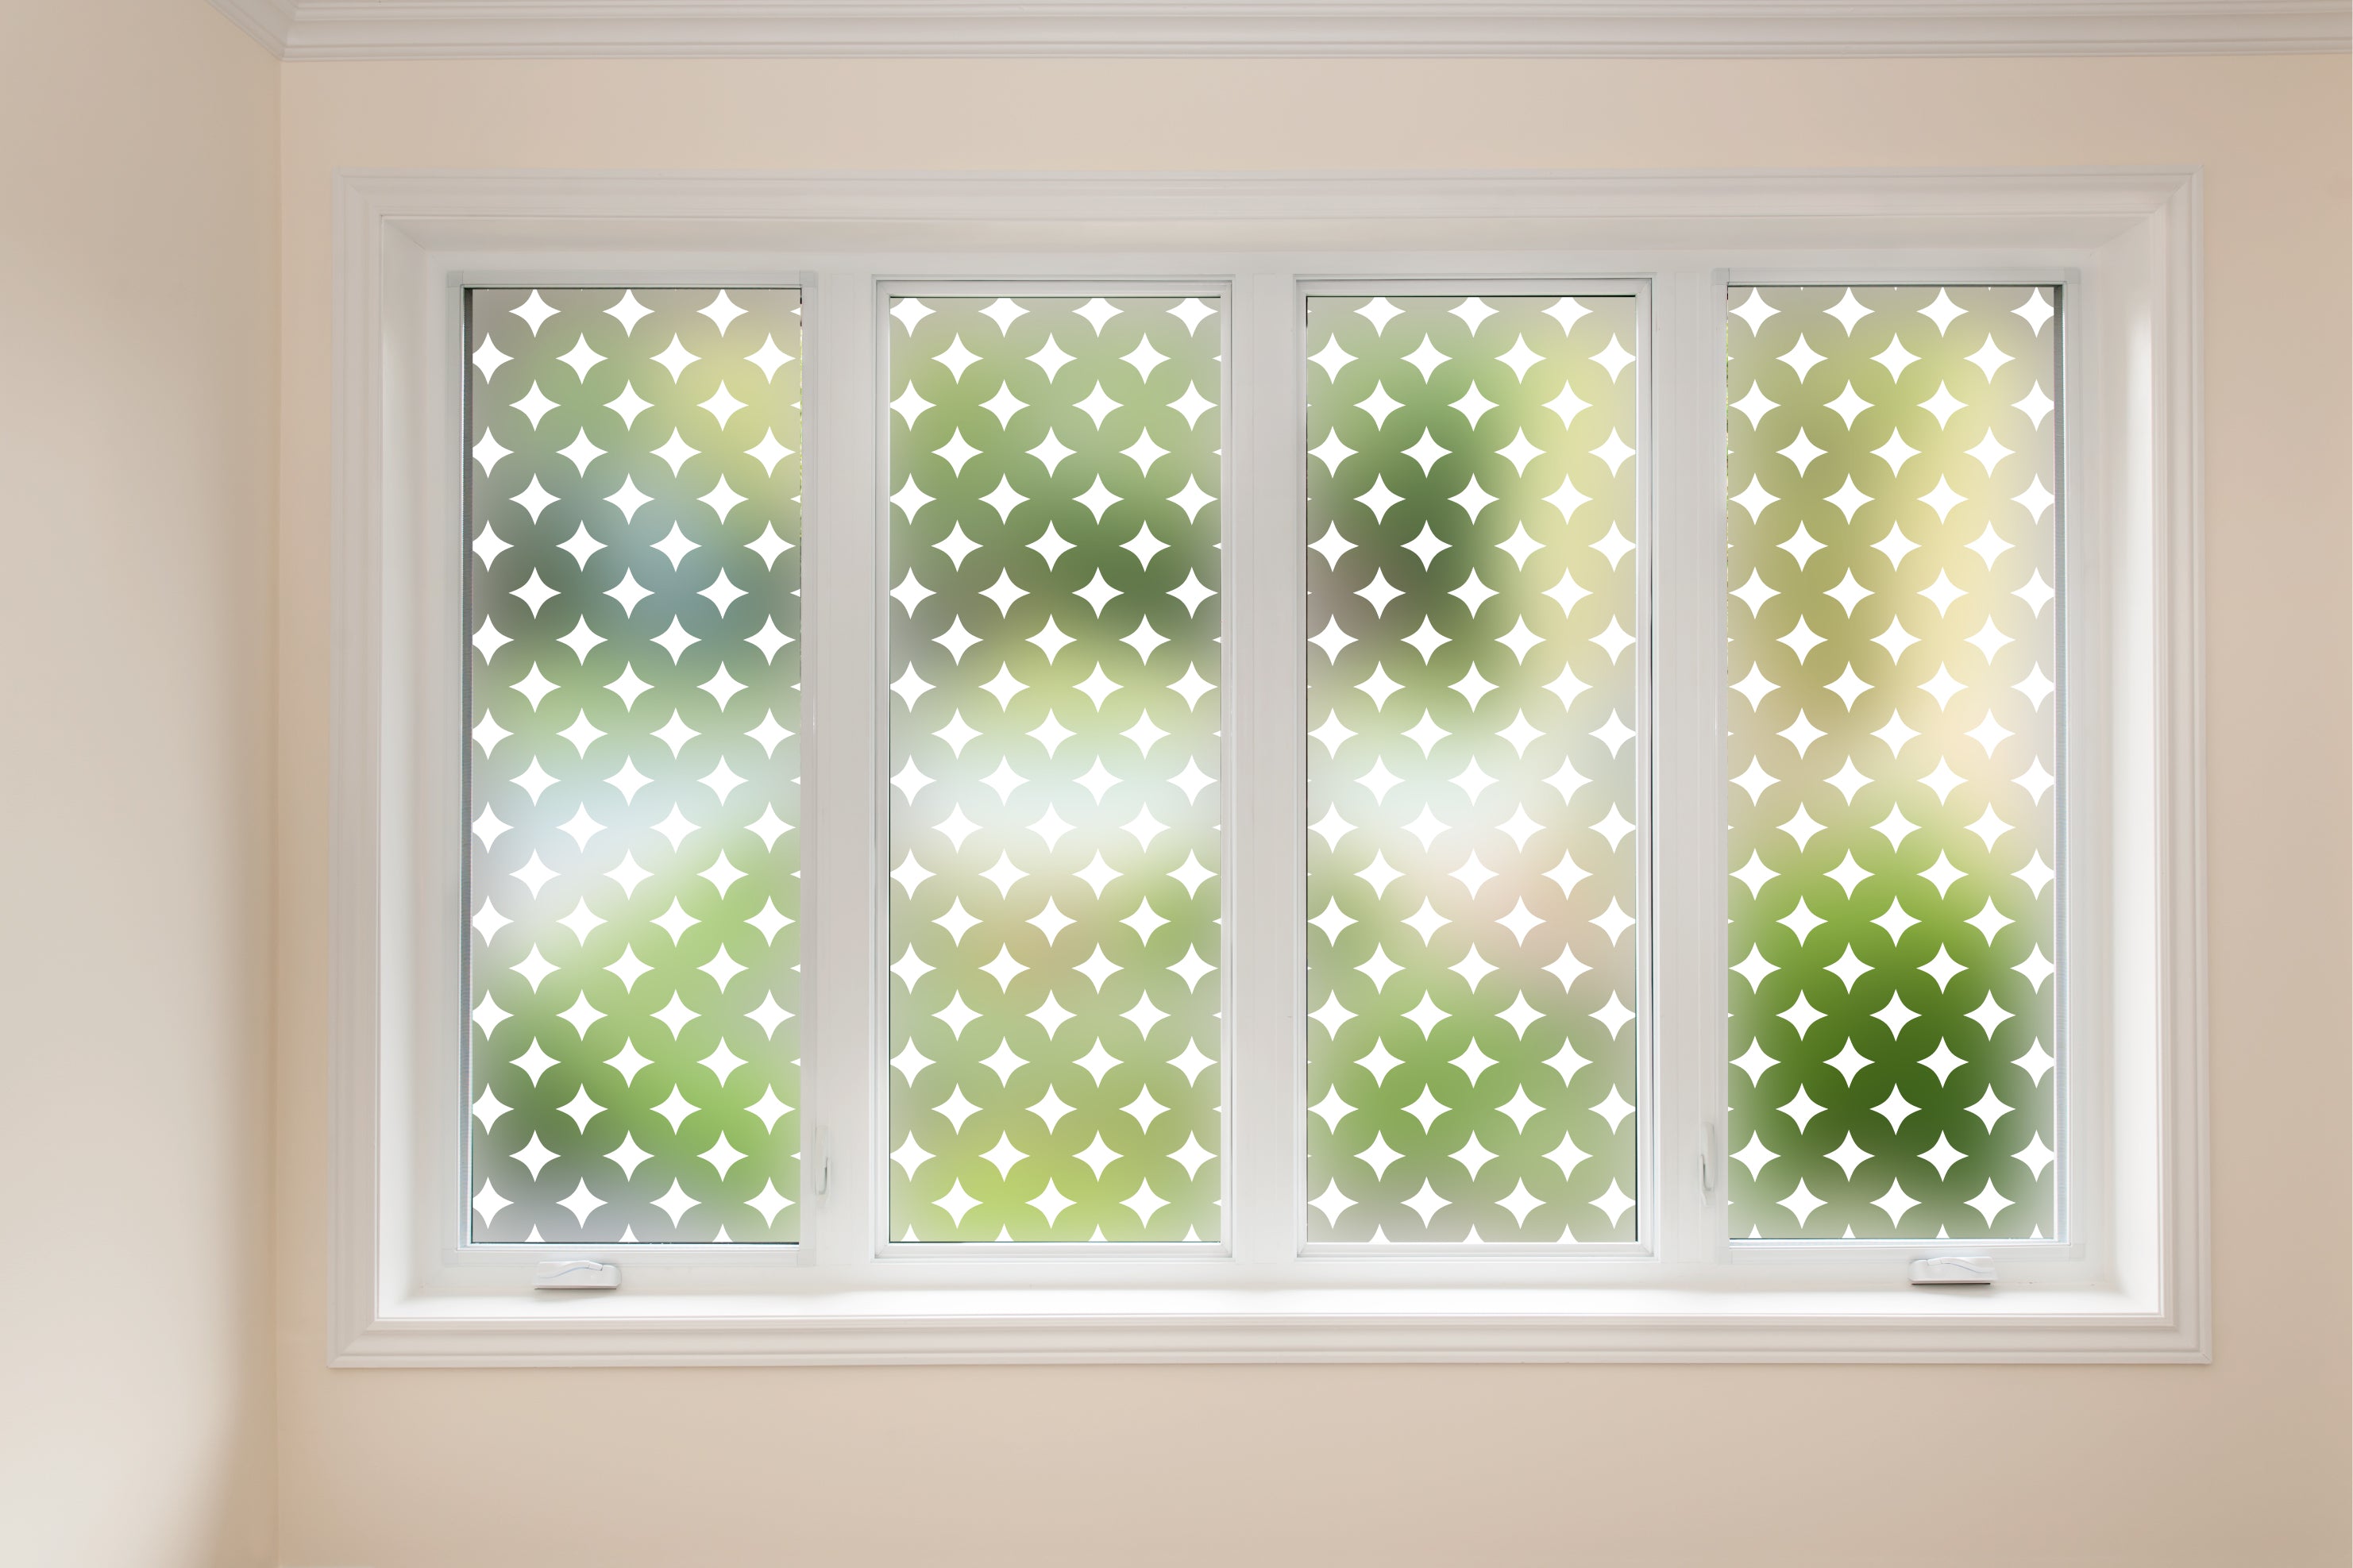 4 Point Star Decorative Frosted Window Privacy Film